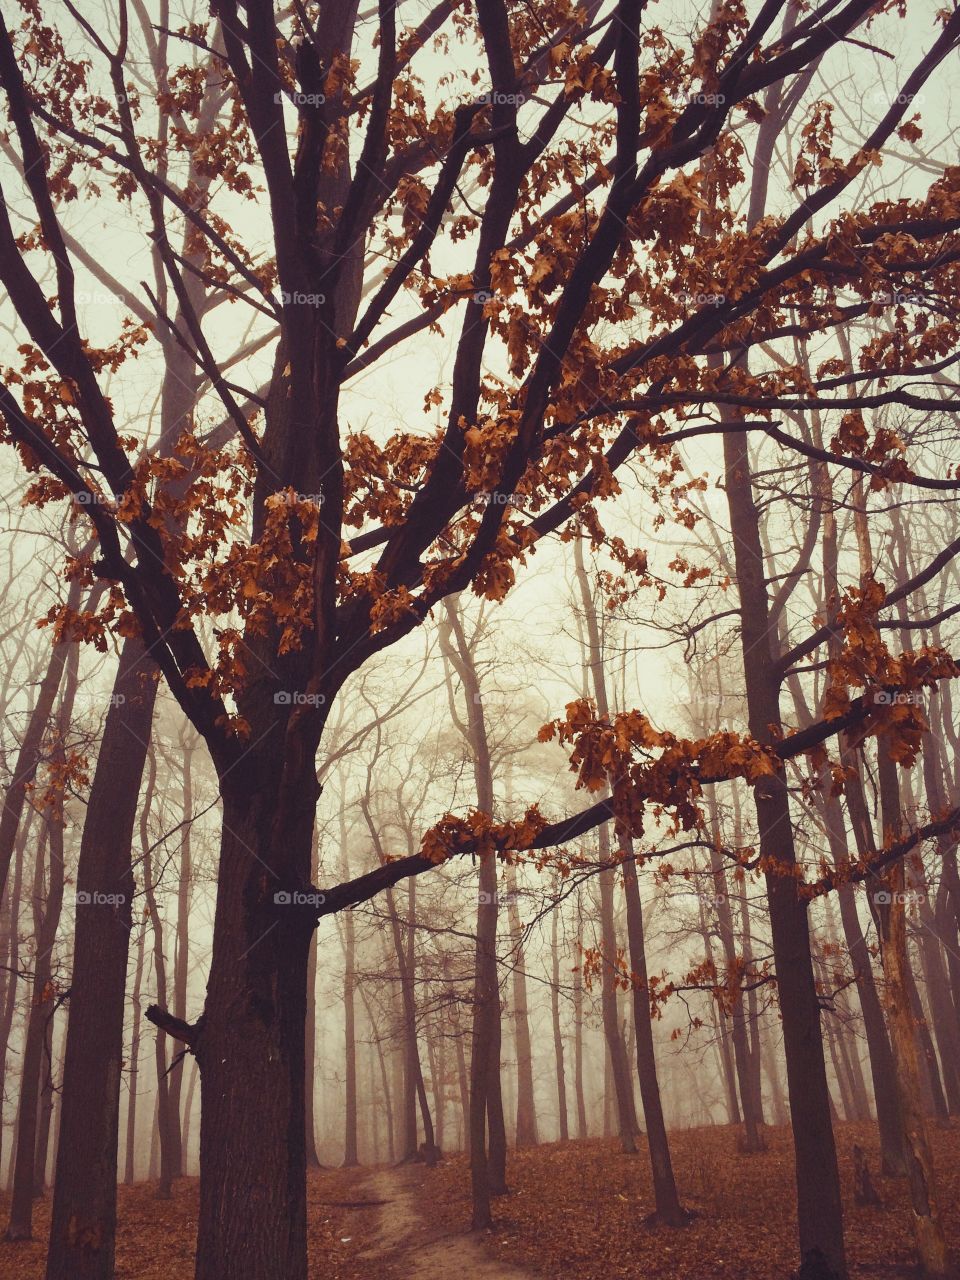 foggy tree with autumn foliage in the park